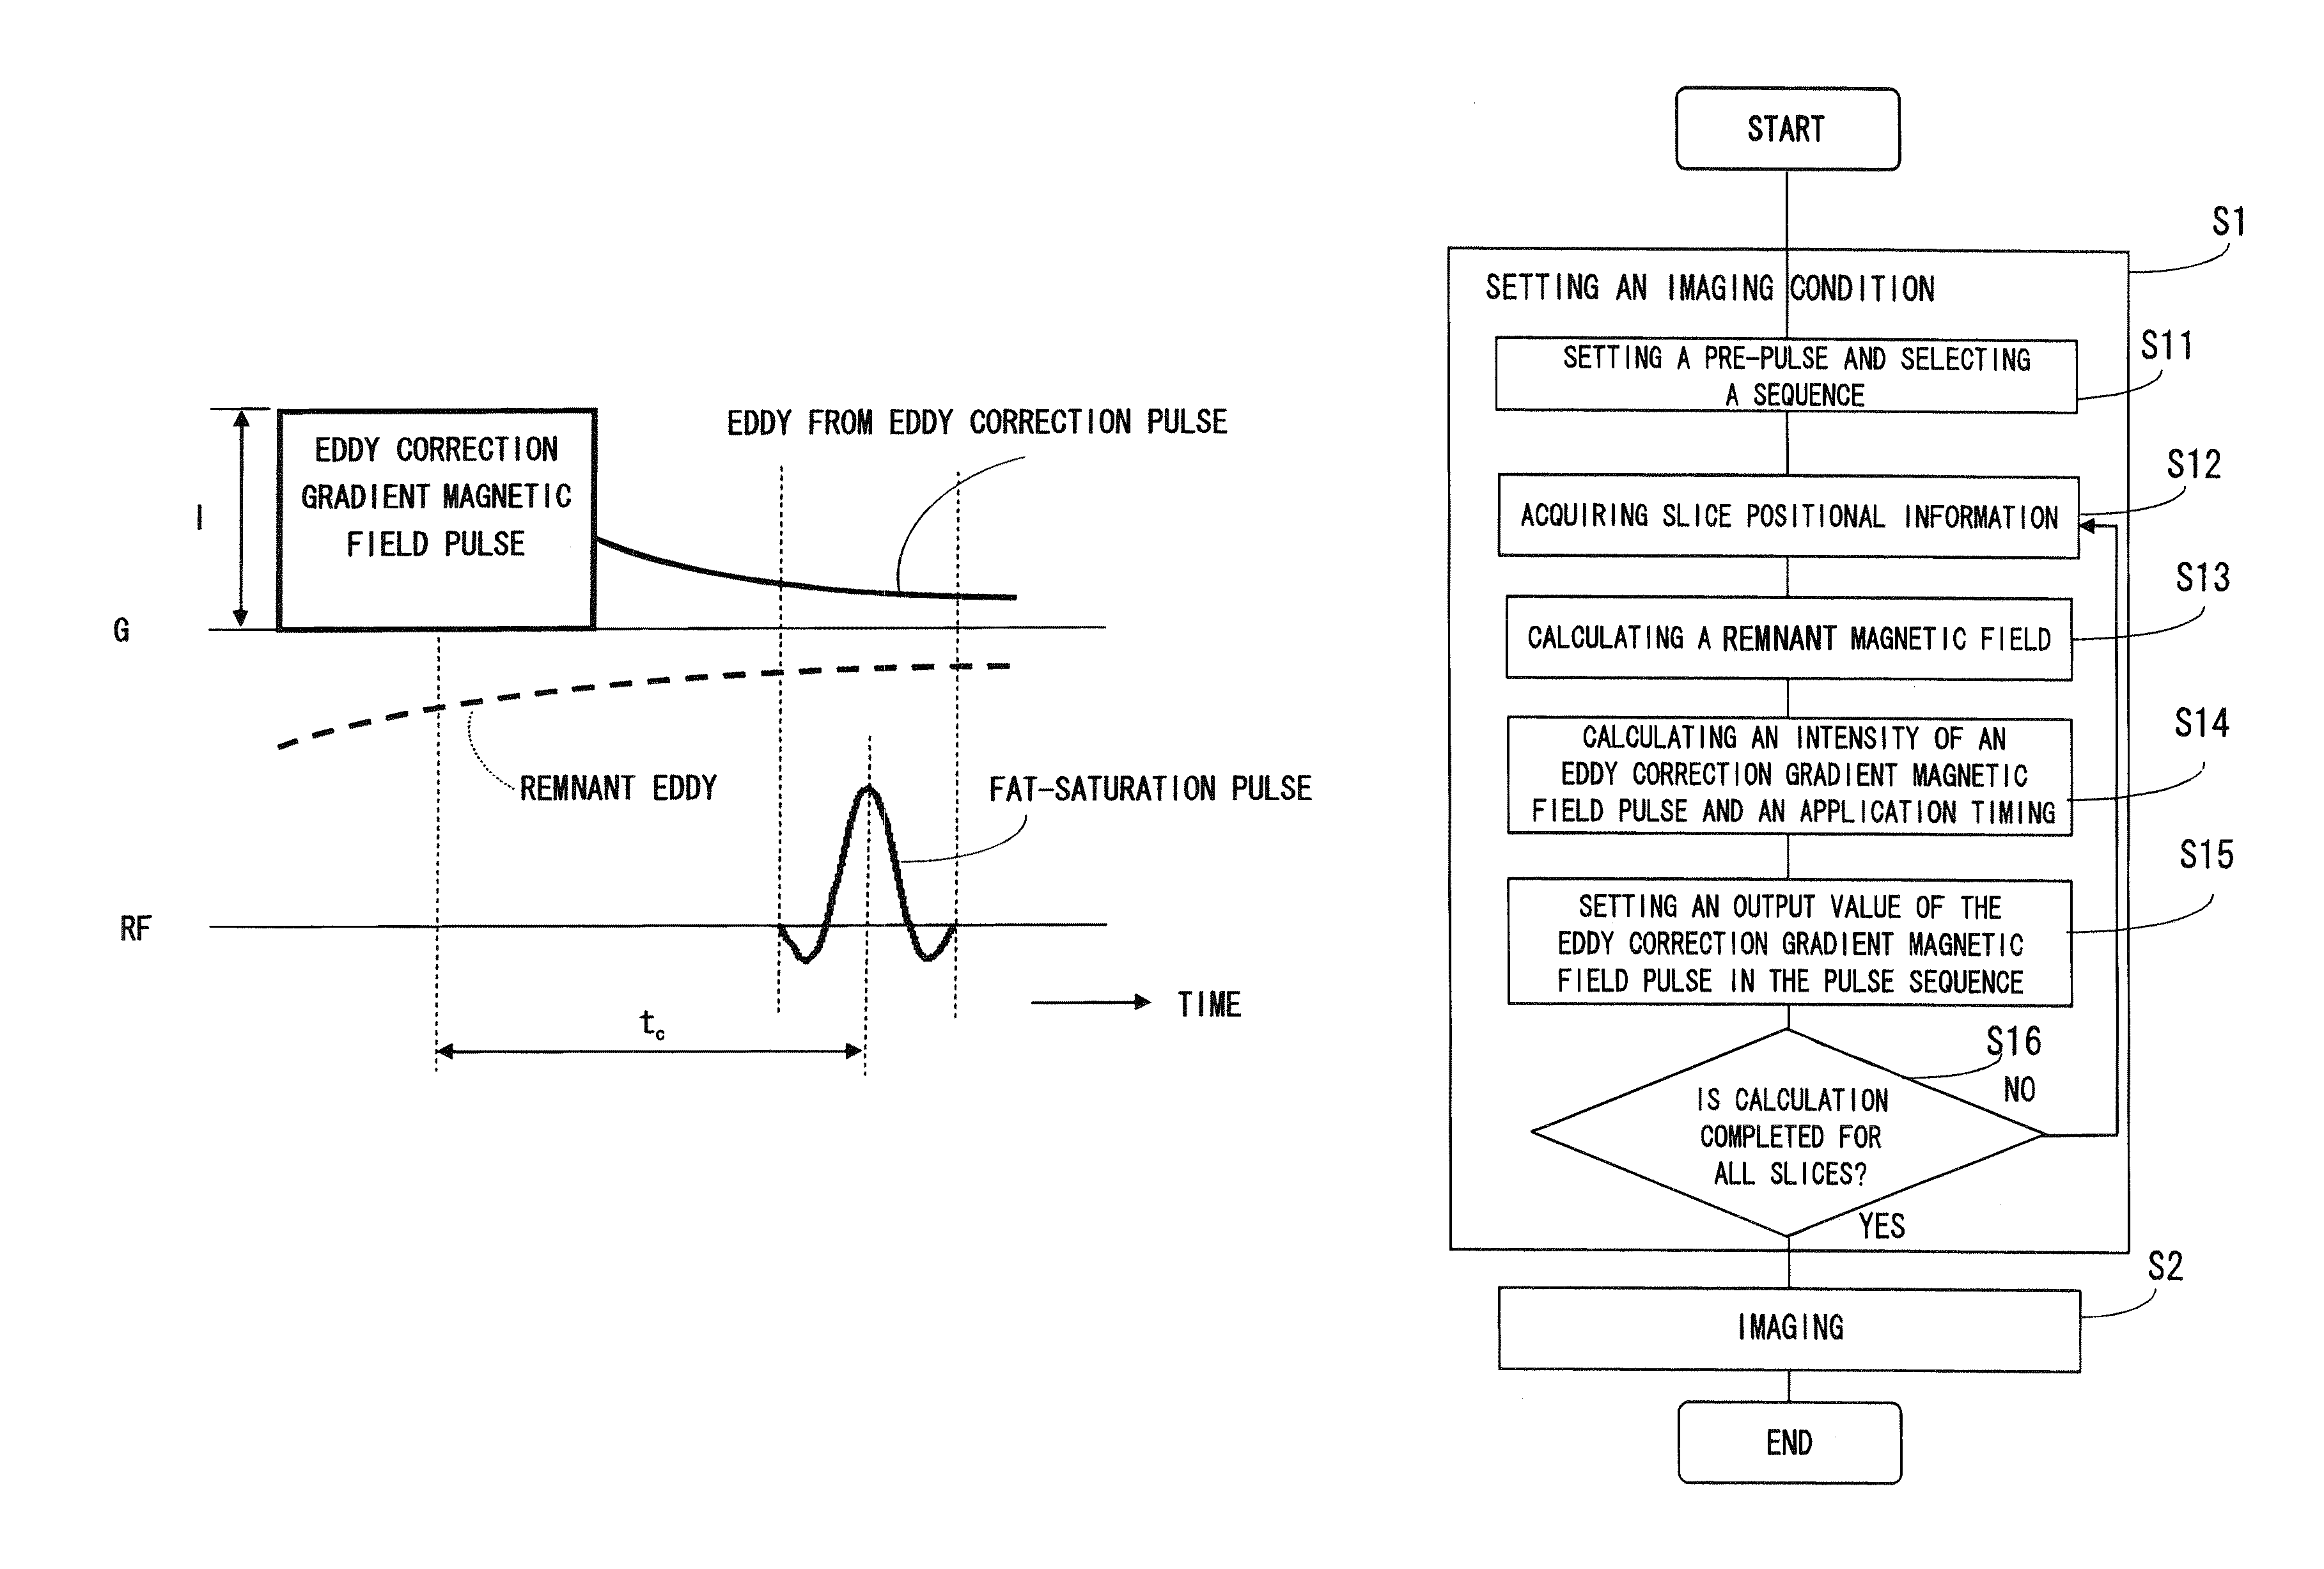 Magnetic resonance imaging apparatus/method counter-actively suppressing remnant eddy current magnetic fields generated from gradients applied before controlling contrast pre-pulses and MRI image data acquisition